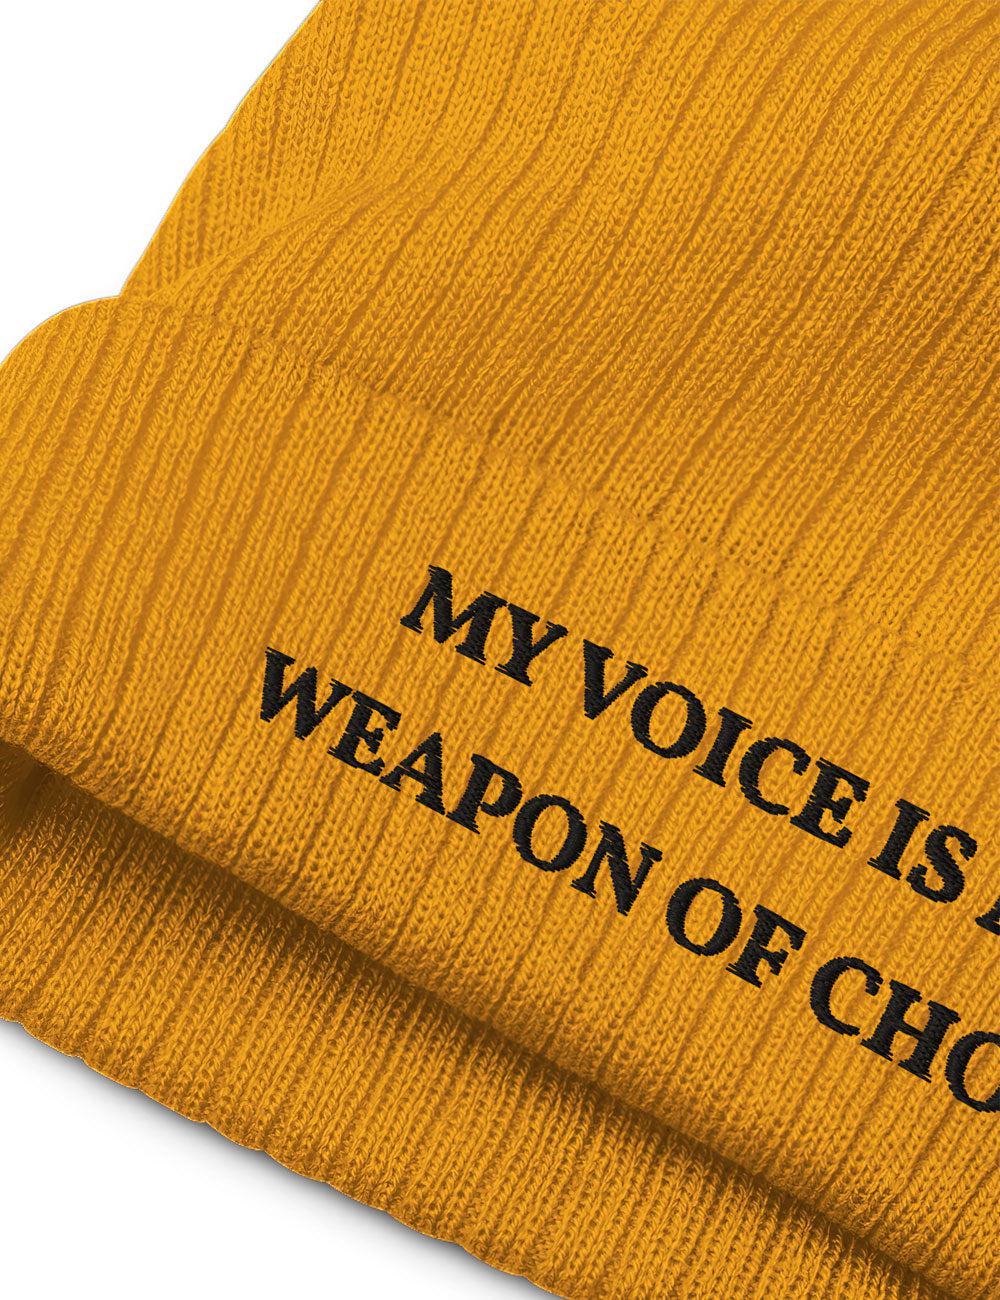 "Weapon of Choice" Ribbed Knit Embroidered Beanie